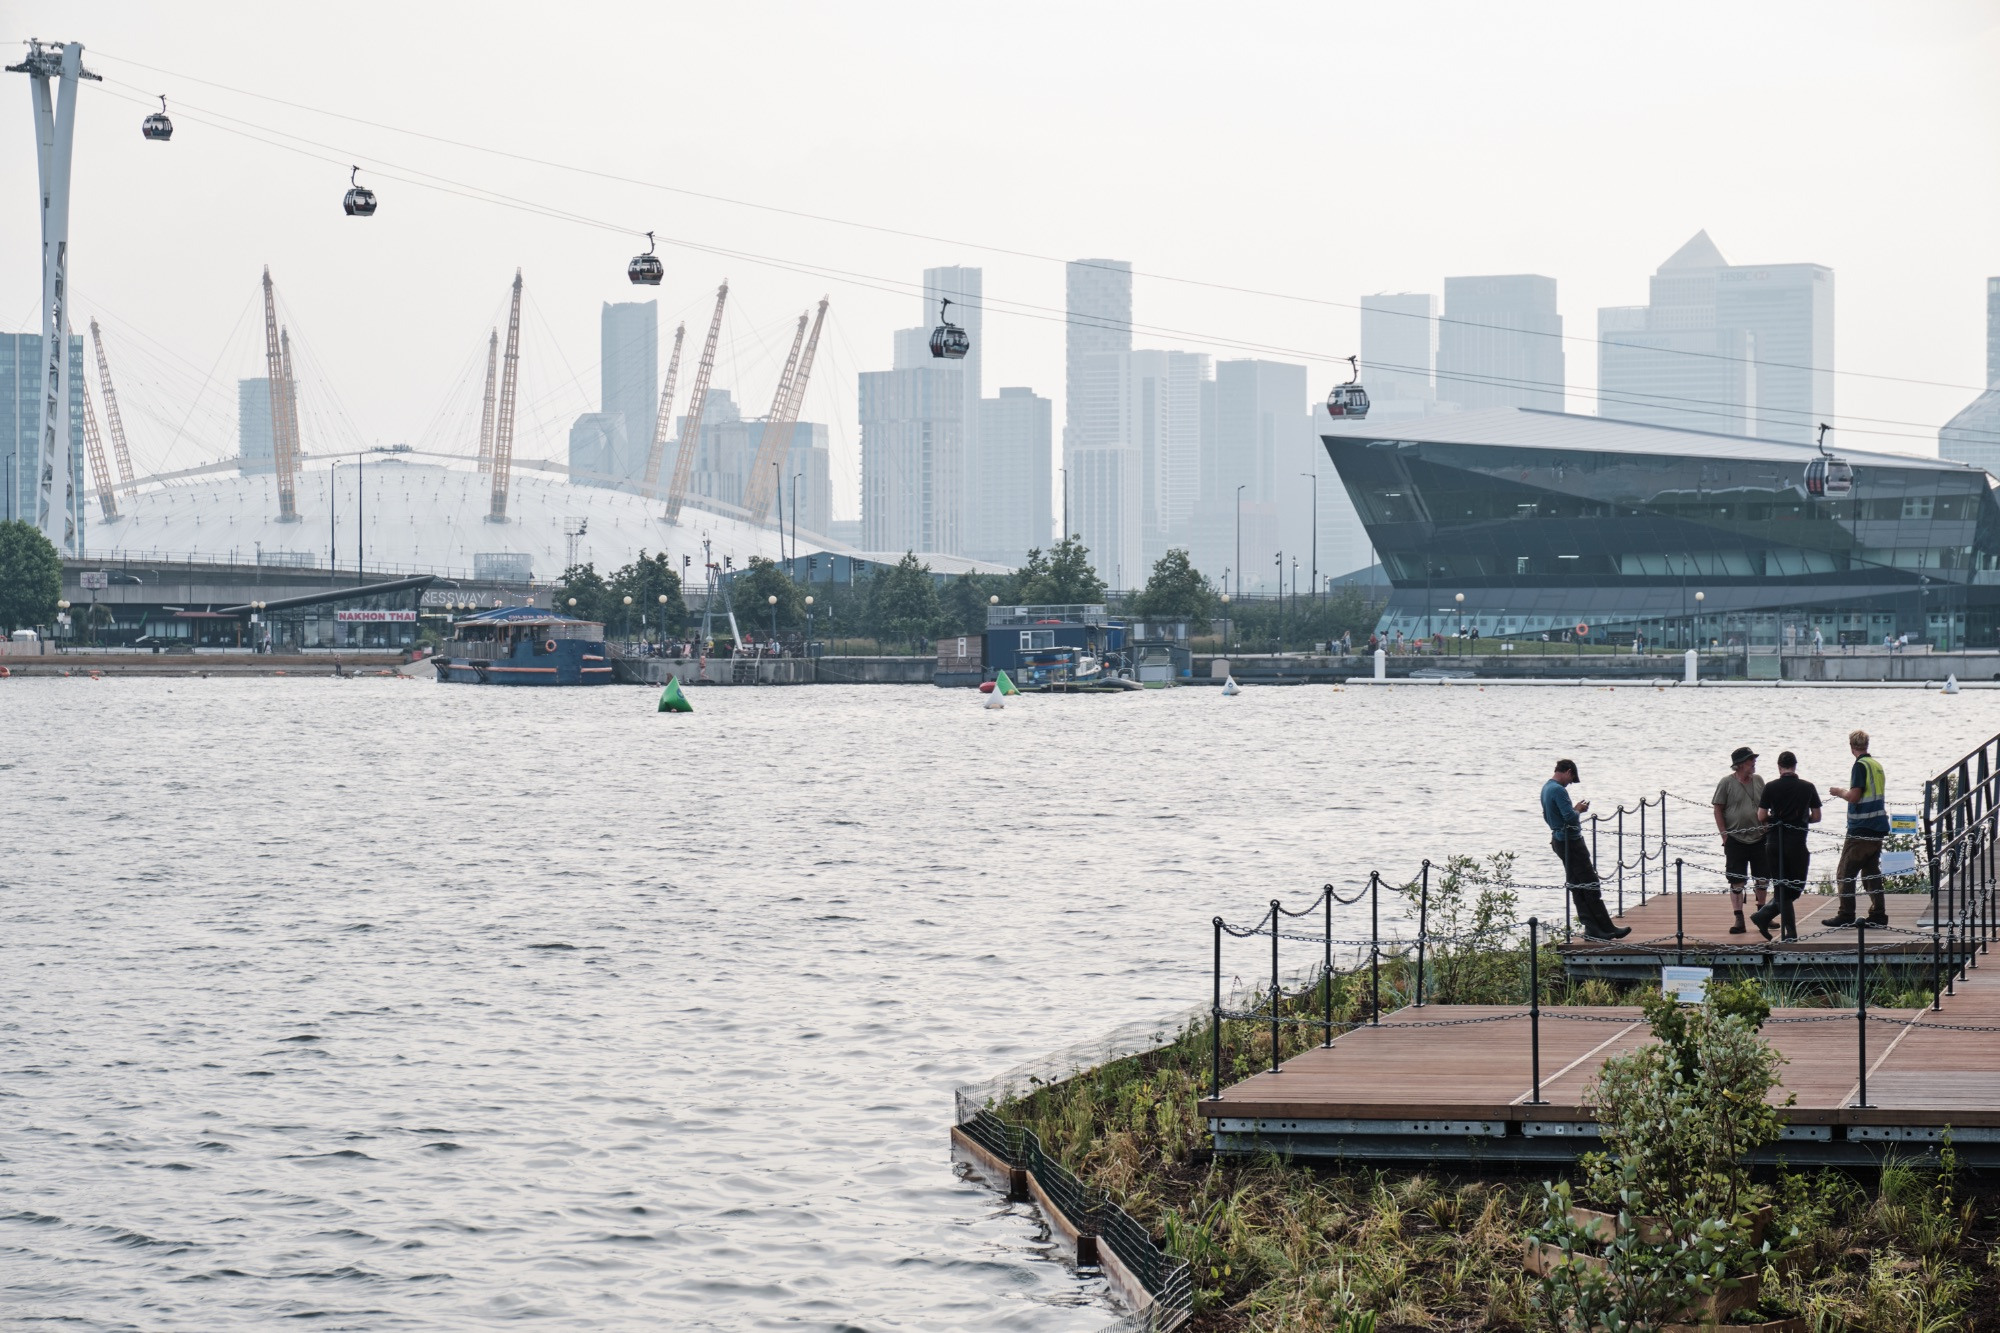 View of the Royal Docks floating garden with the Millennium dome in the background